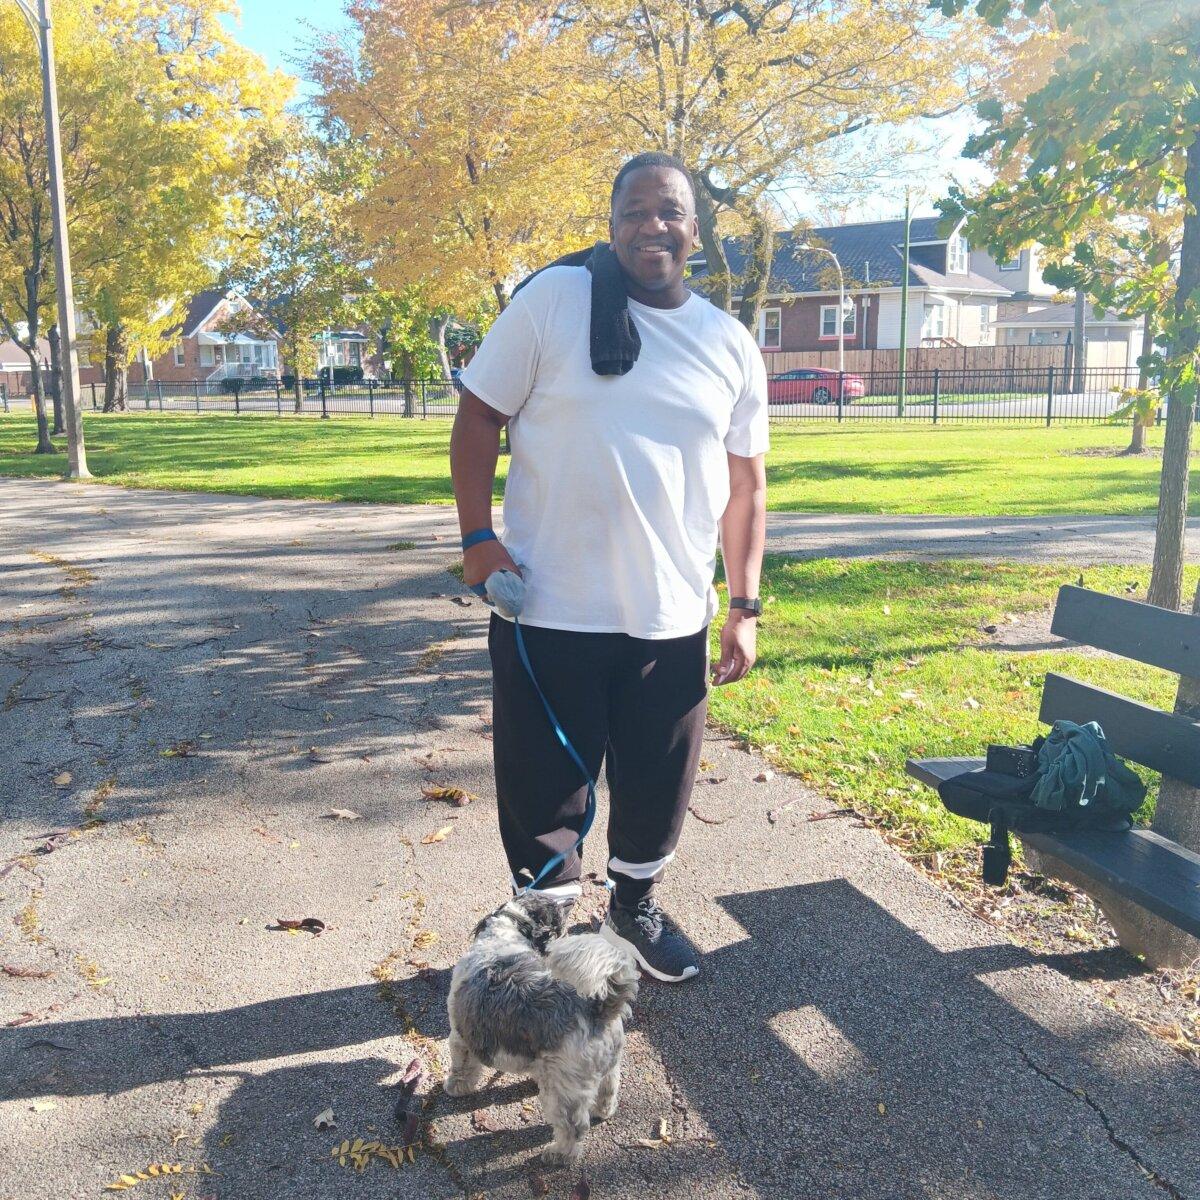 Kieron Scott, one of many residents who object to plans that could see hundreds of illegal immigrants claiming Amundsen's fieldhouse and displacing local programming, walks his dog, Duke, through Chicago's Amundsen Park, on Oct. 24, 2023. (Nathan Worcester/The Epoch Times)